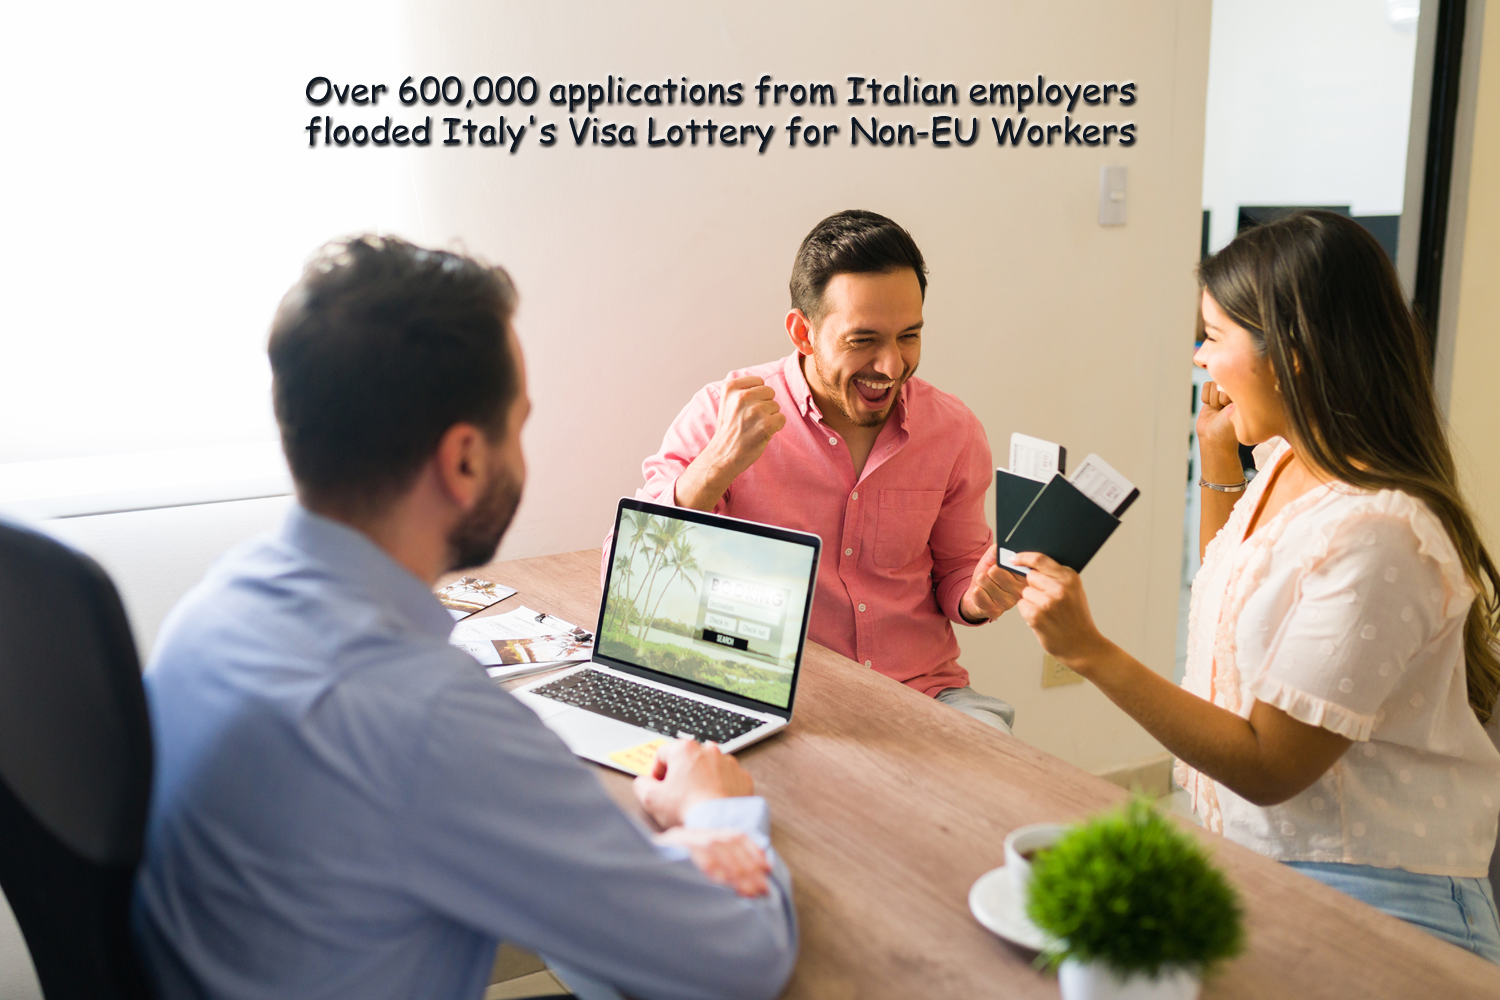 Over 600,000 applications from Italian employers flooded Italy's Visa Lottery for Non-EU Workers.